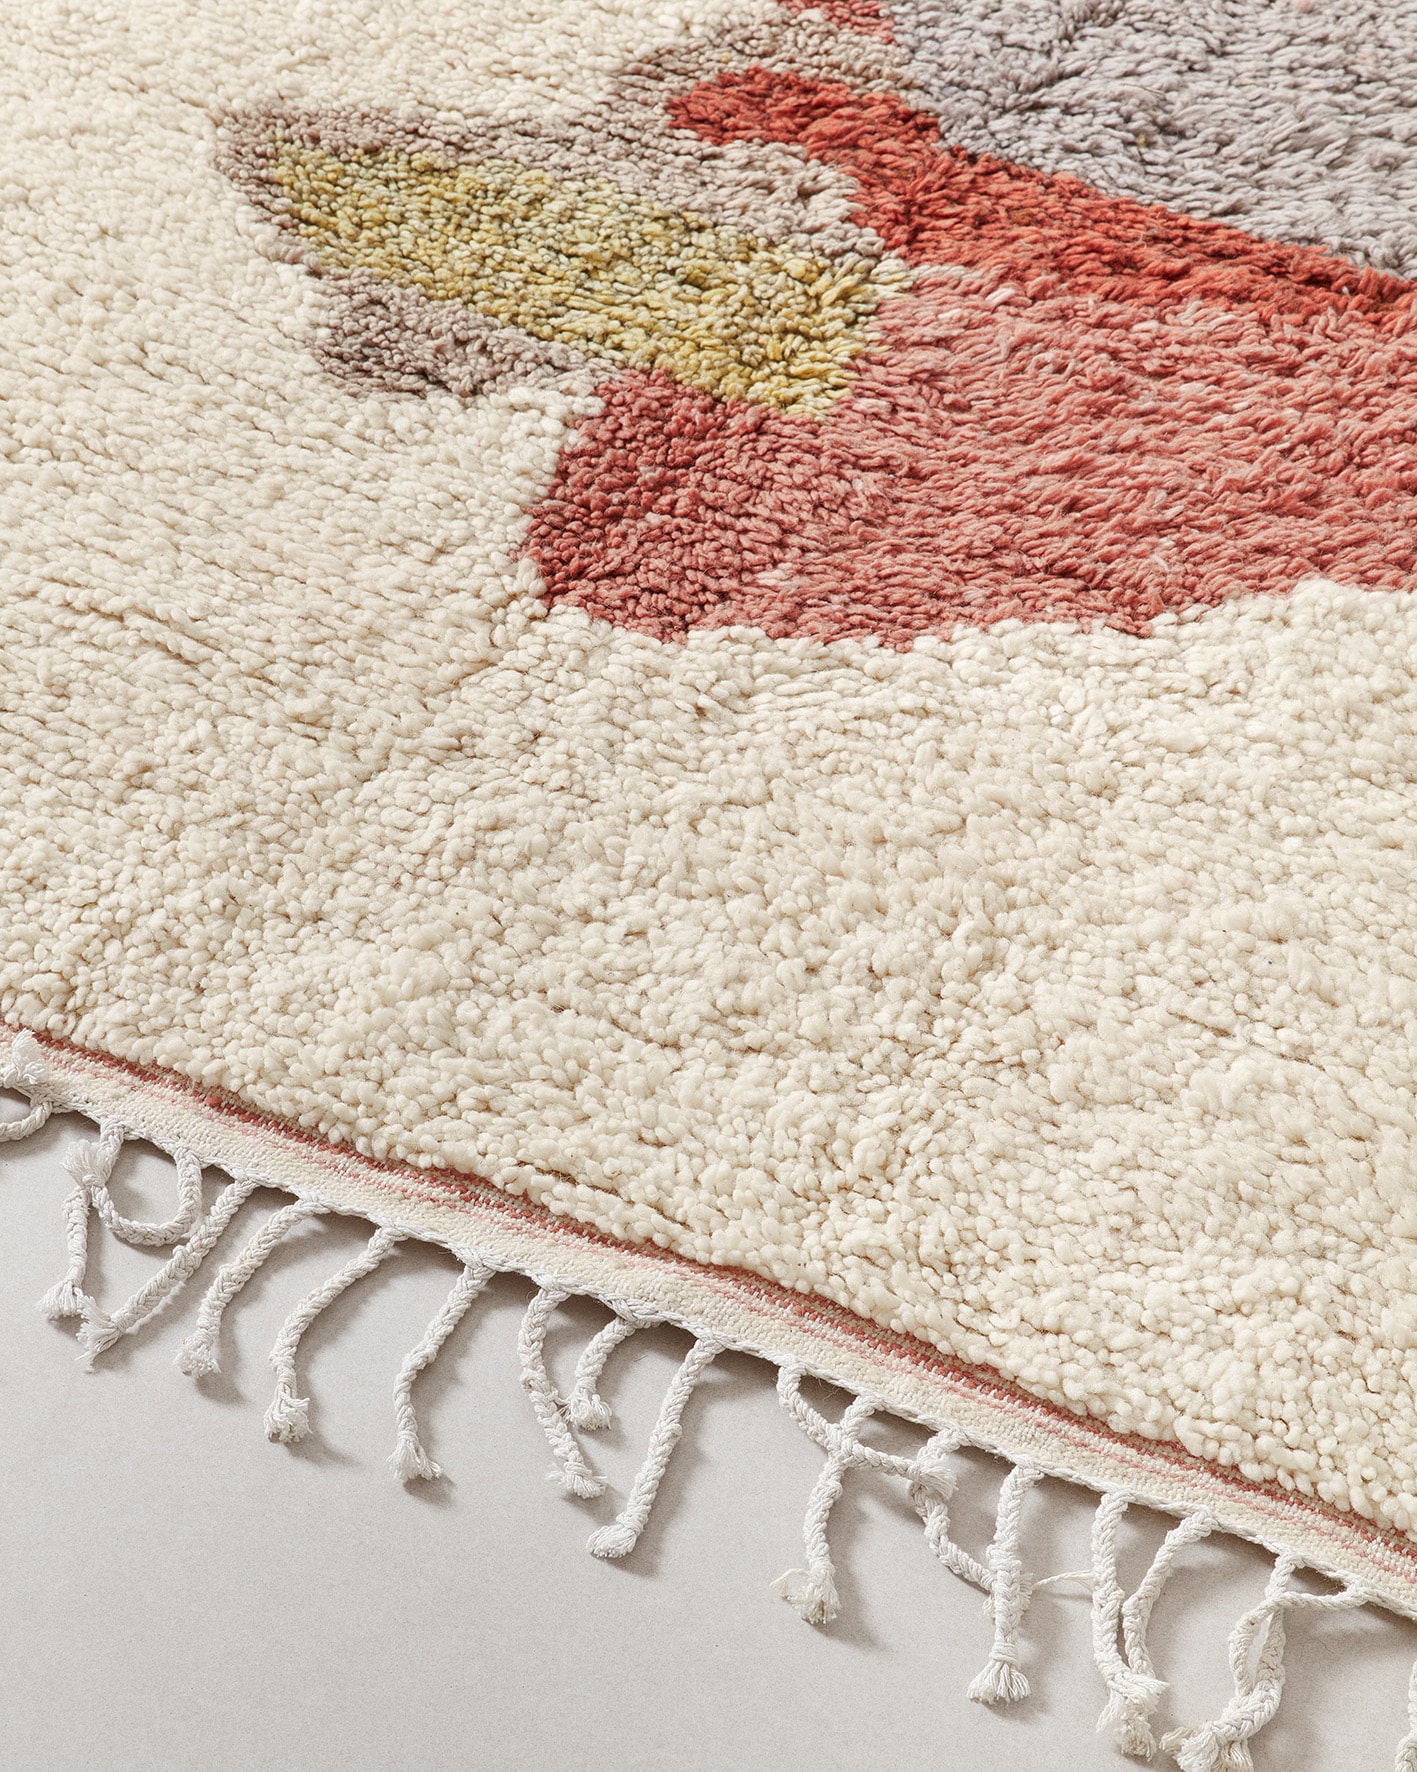 Berber rug with an earth-tone palette, close